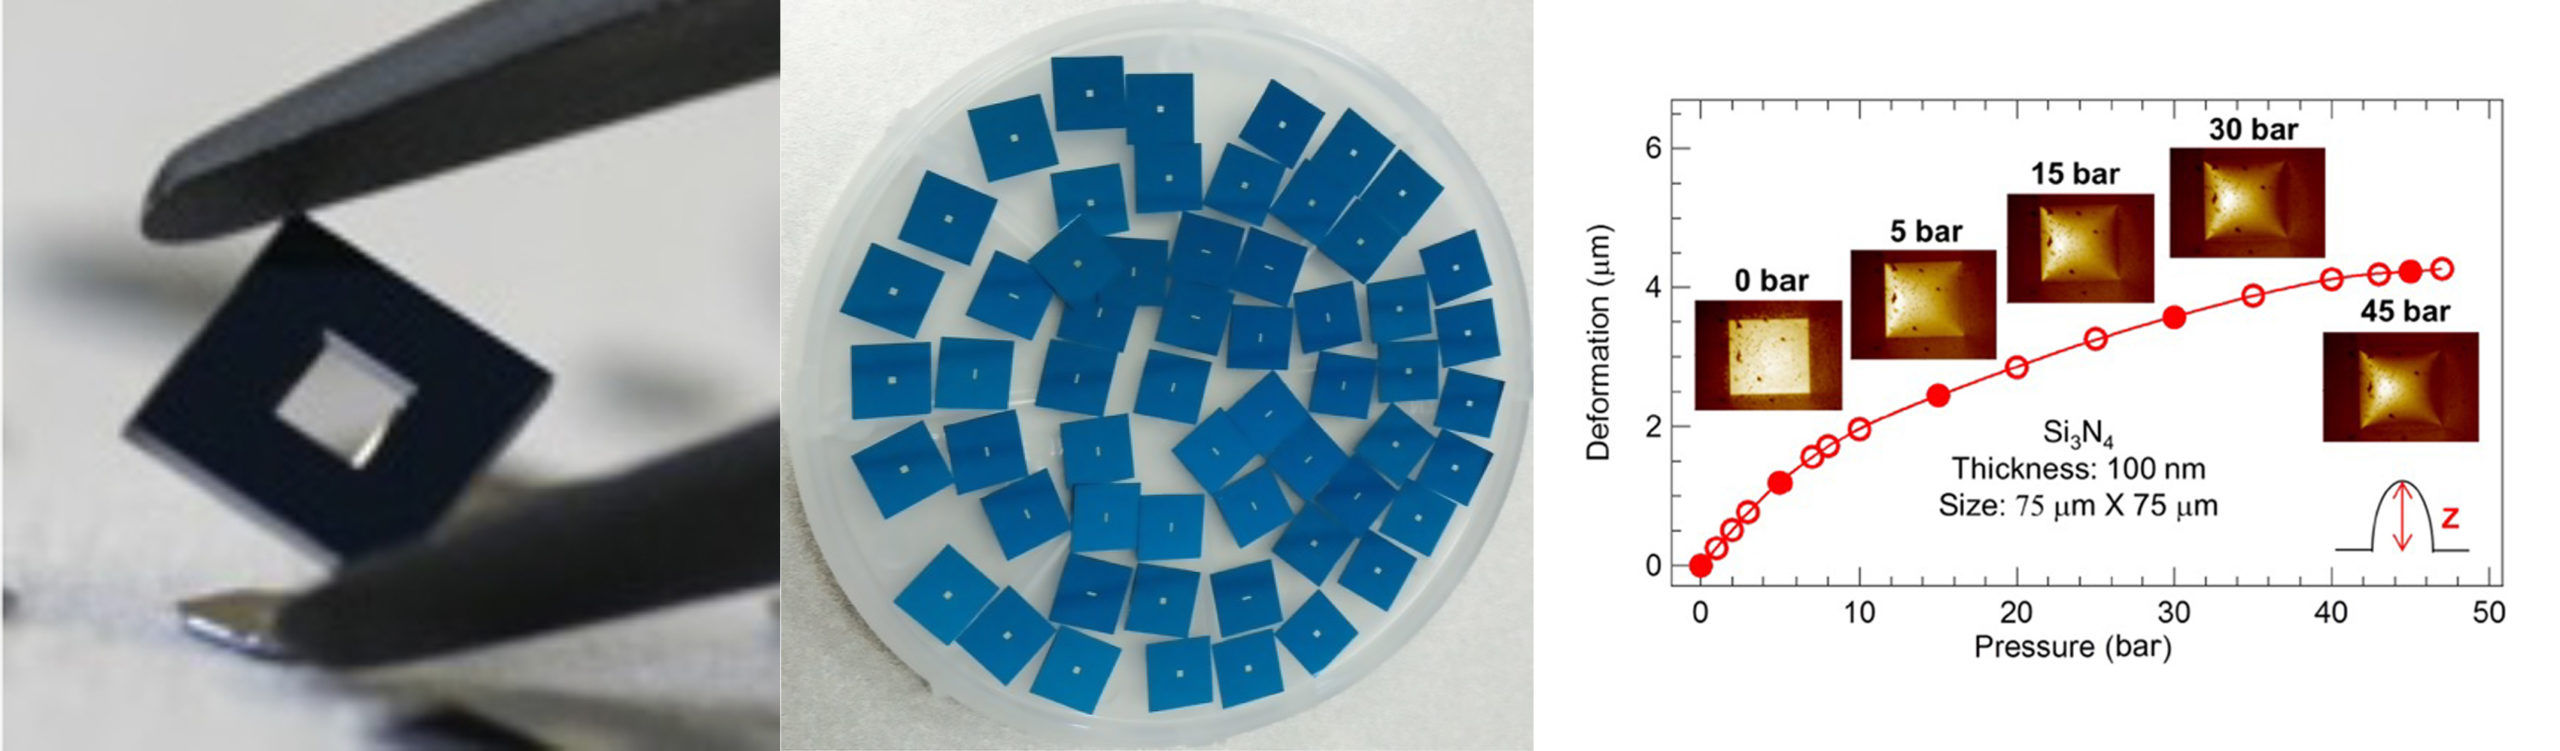 Left: Single window frame in tweezers. Center: Dozens of blue squares arranged in circle. Right: Pressure vs dimension graph with series of window photos.